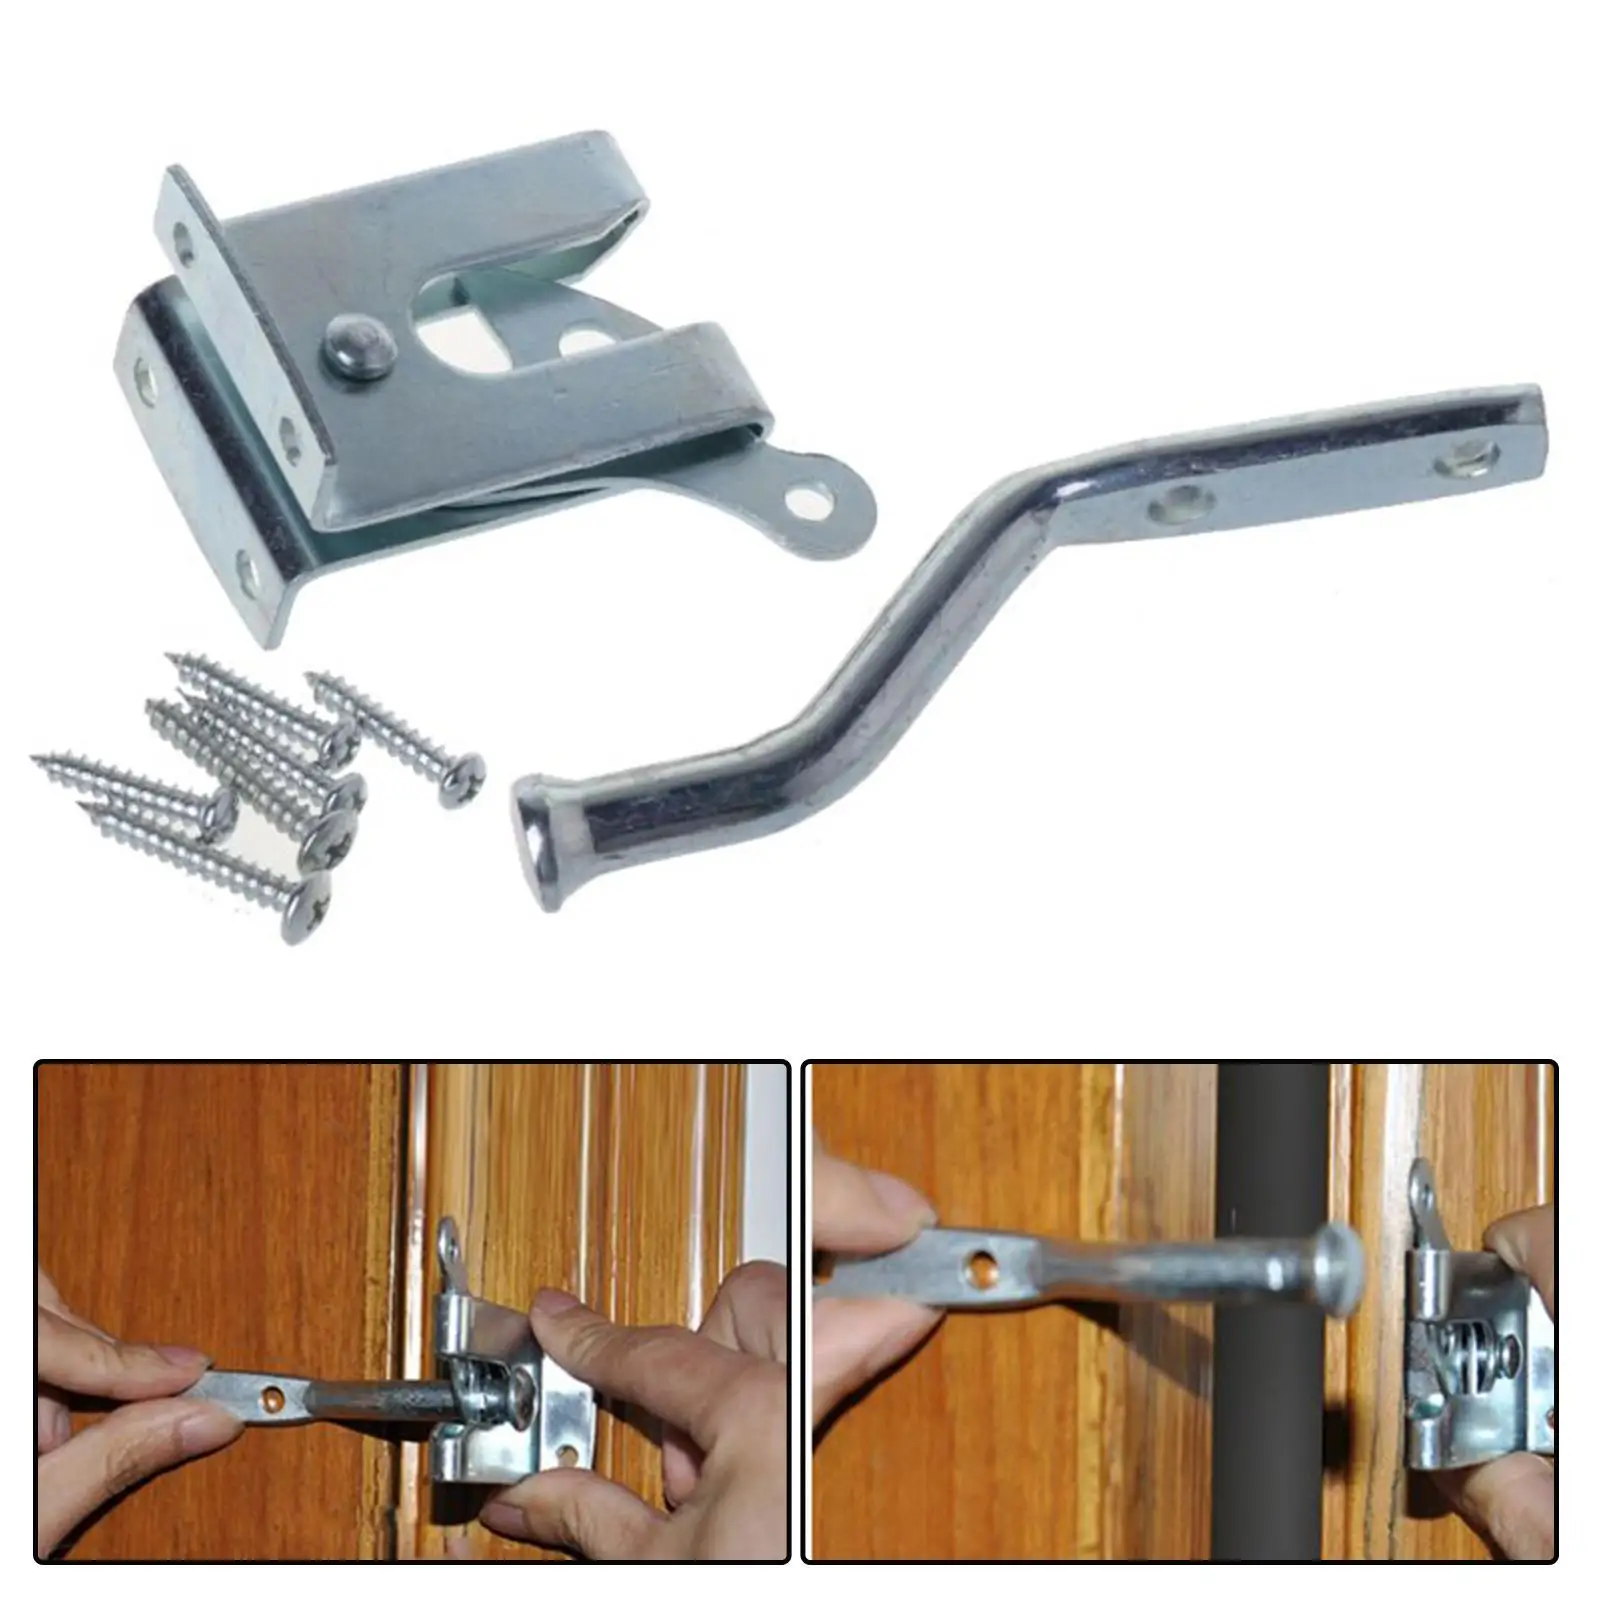 Self Locking Gte Ltch Door ltches Grvity Lever Gte Ctch Hrdwre utomtic for Furniture Vinyl/Wood Fence Pool Bby Gtes